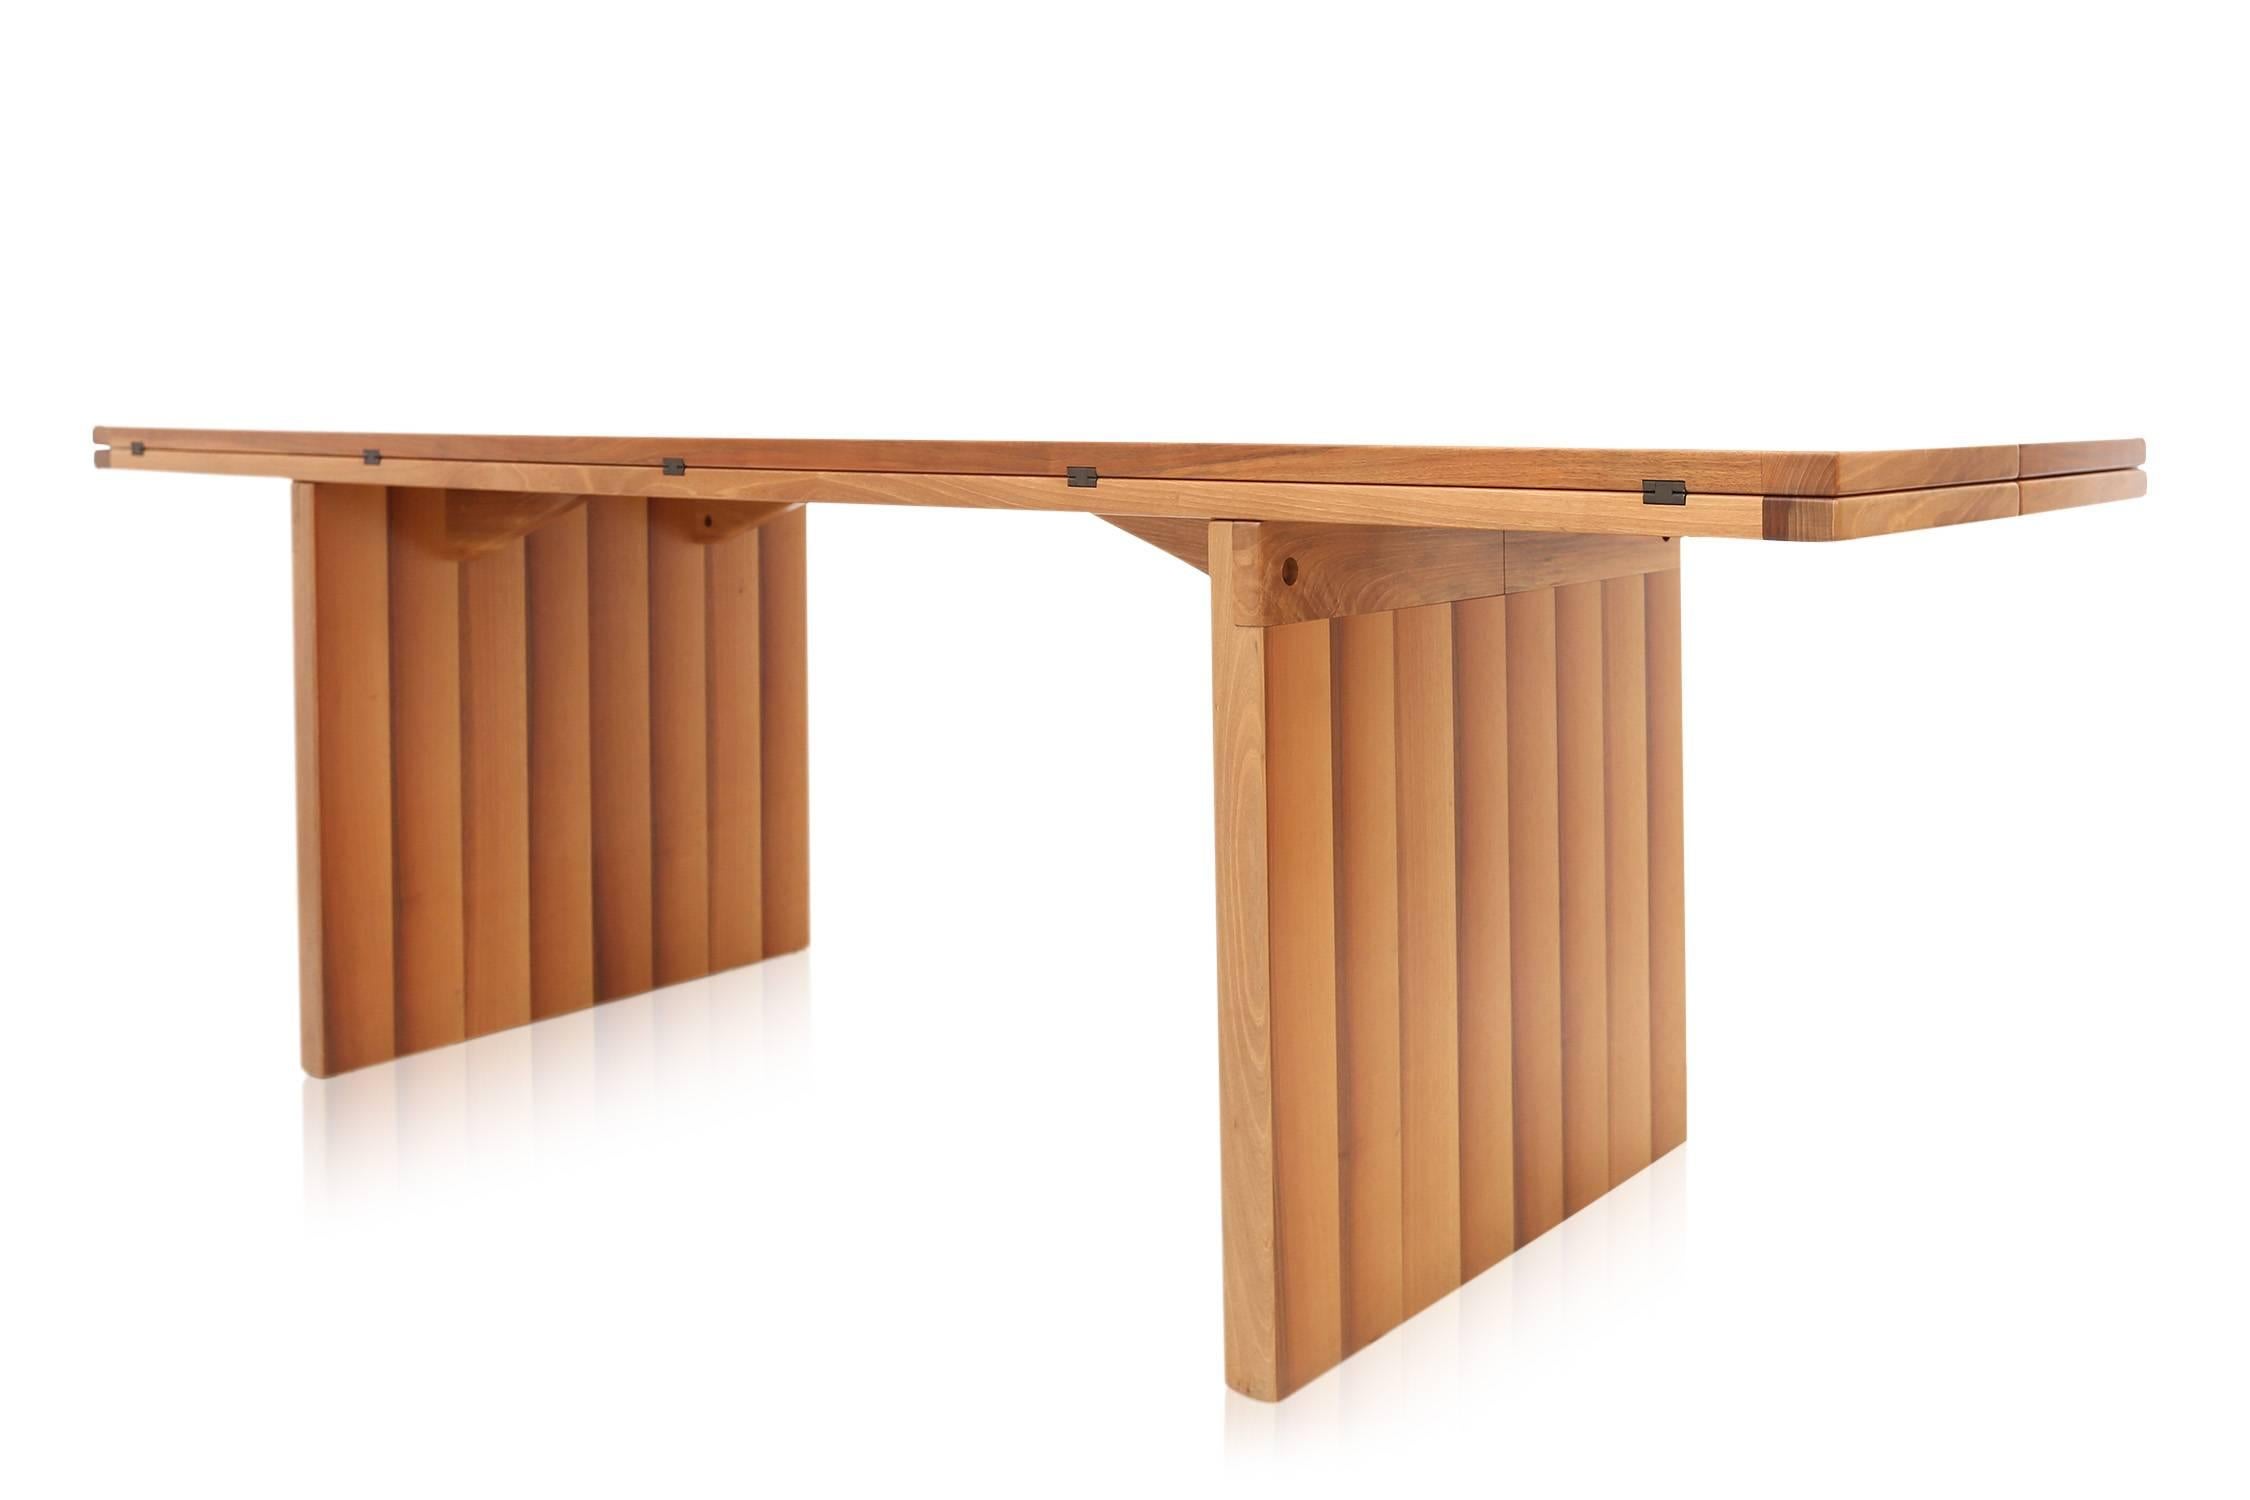 Rectangular table with extending top.
A limited edition version. Model 'La Barca', meaning 'the boat'

by Piero De Martini for Cassina in 1975.

Measures: D 148 cm / 74 cm L 225 cm H 74 cm

 